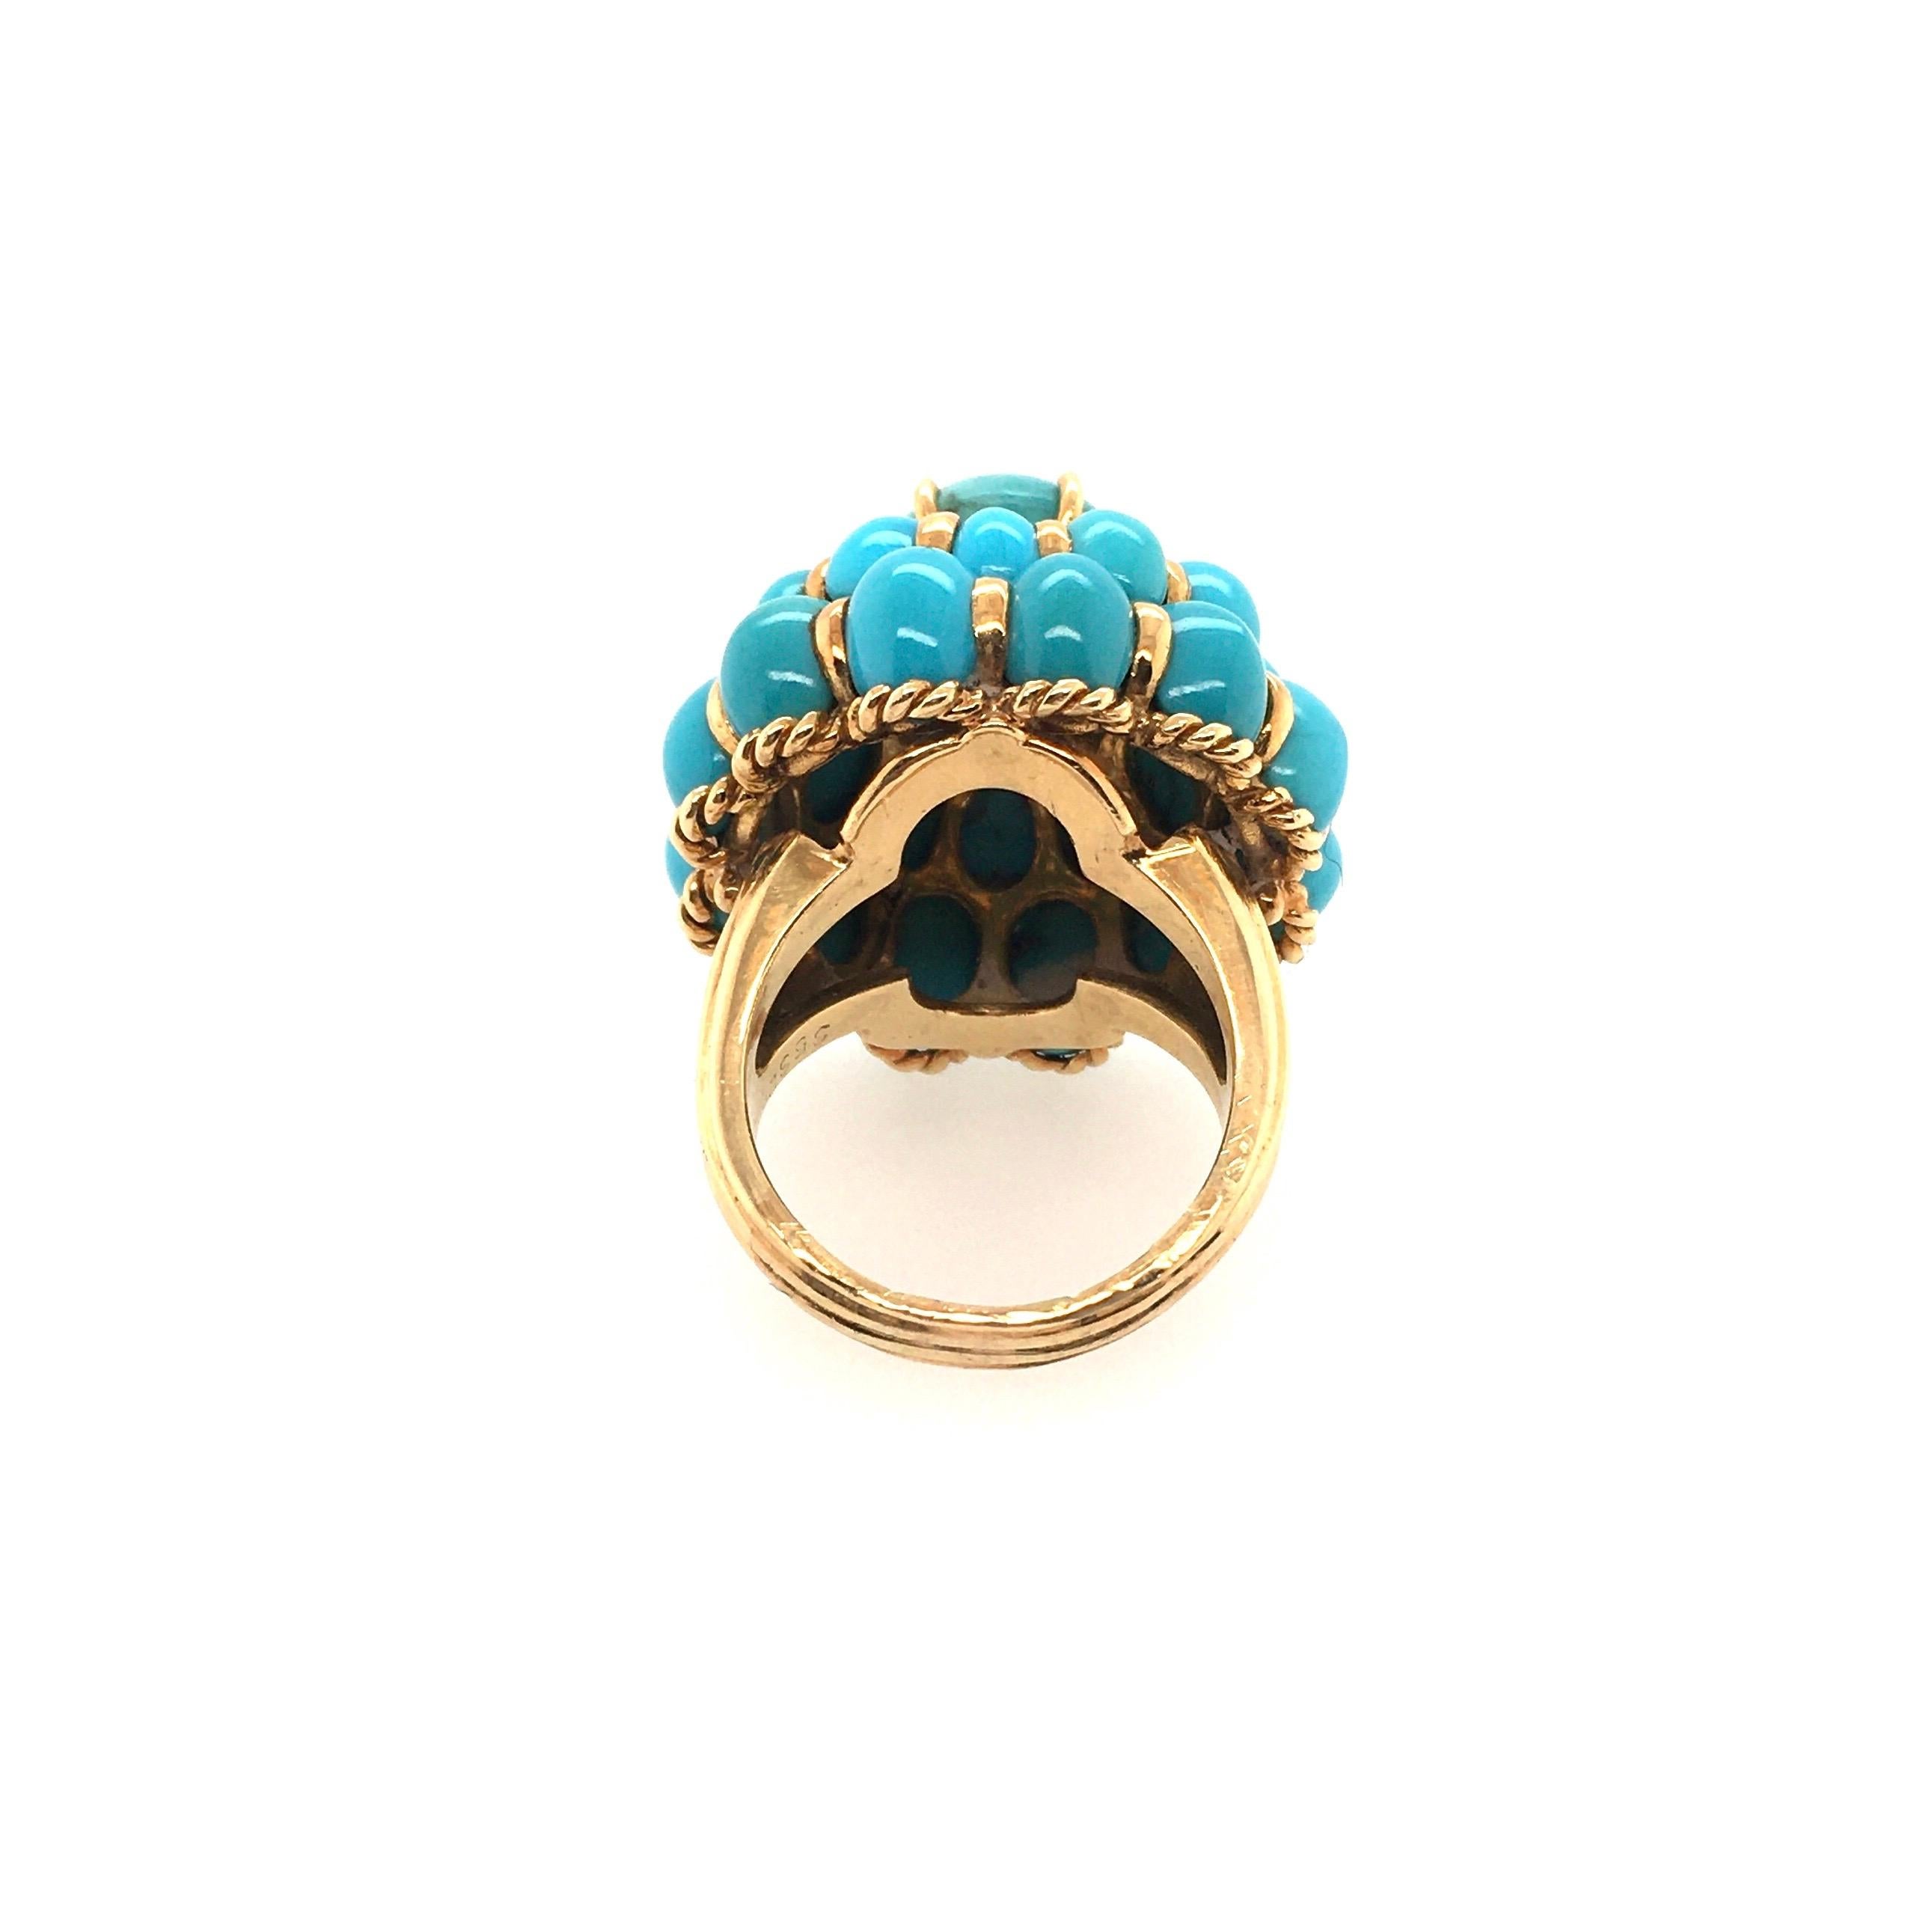 Women's or Men's Gold, Turquoise and Diamond Ring